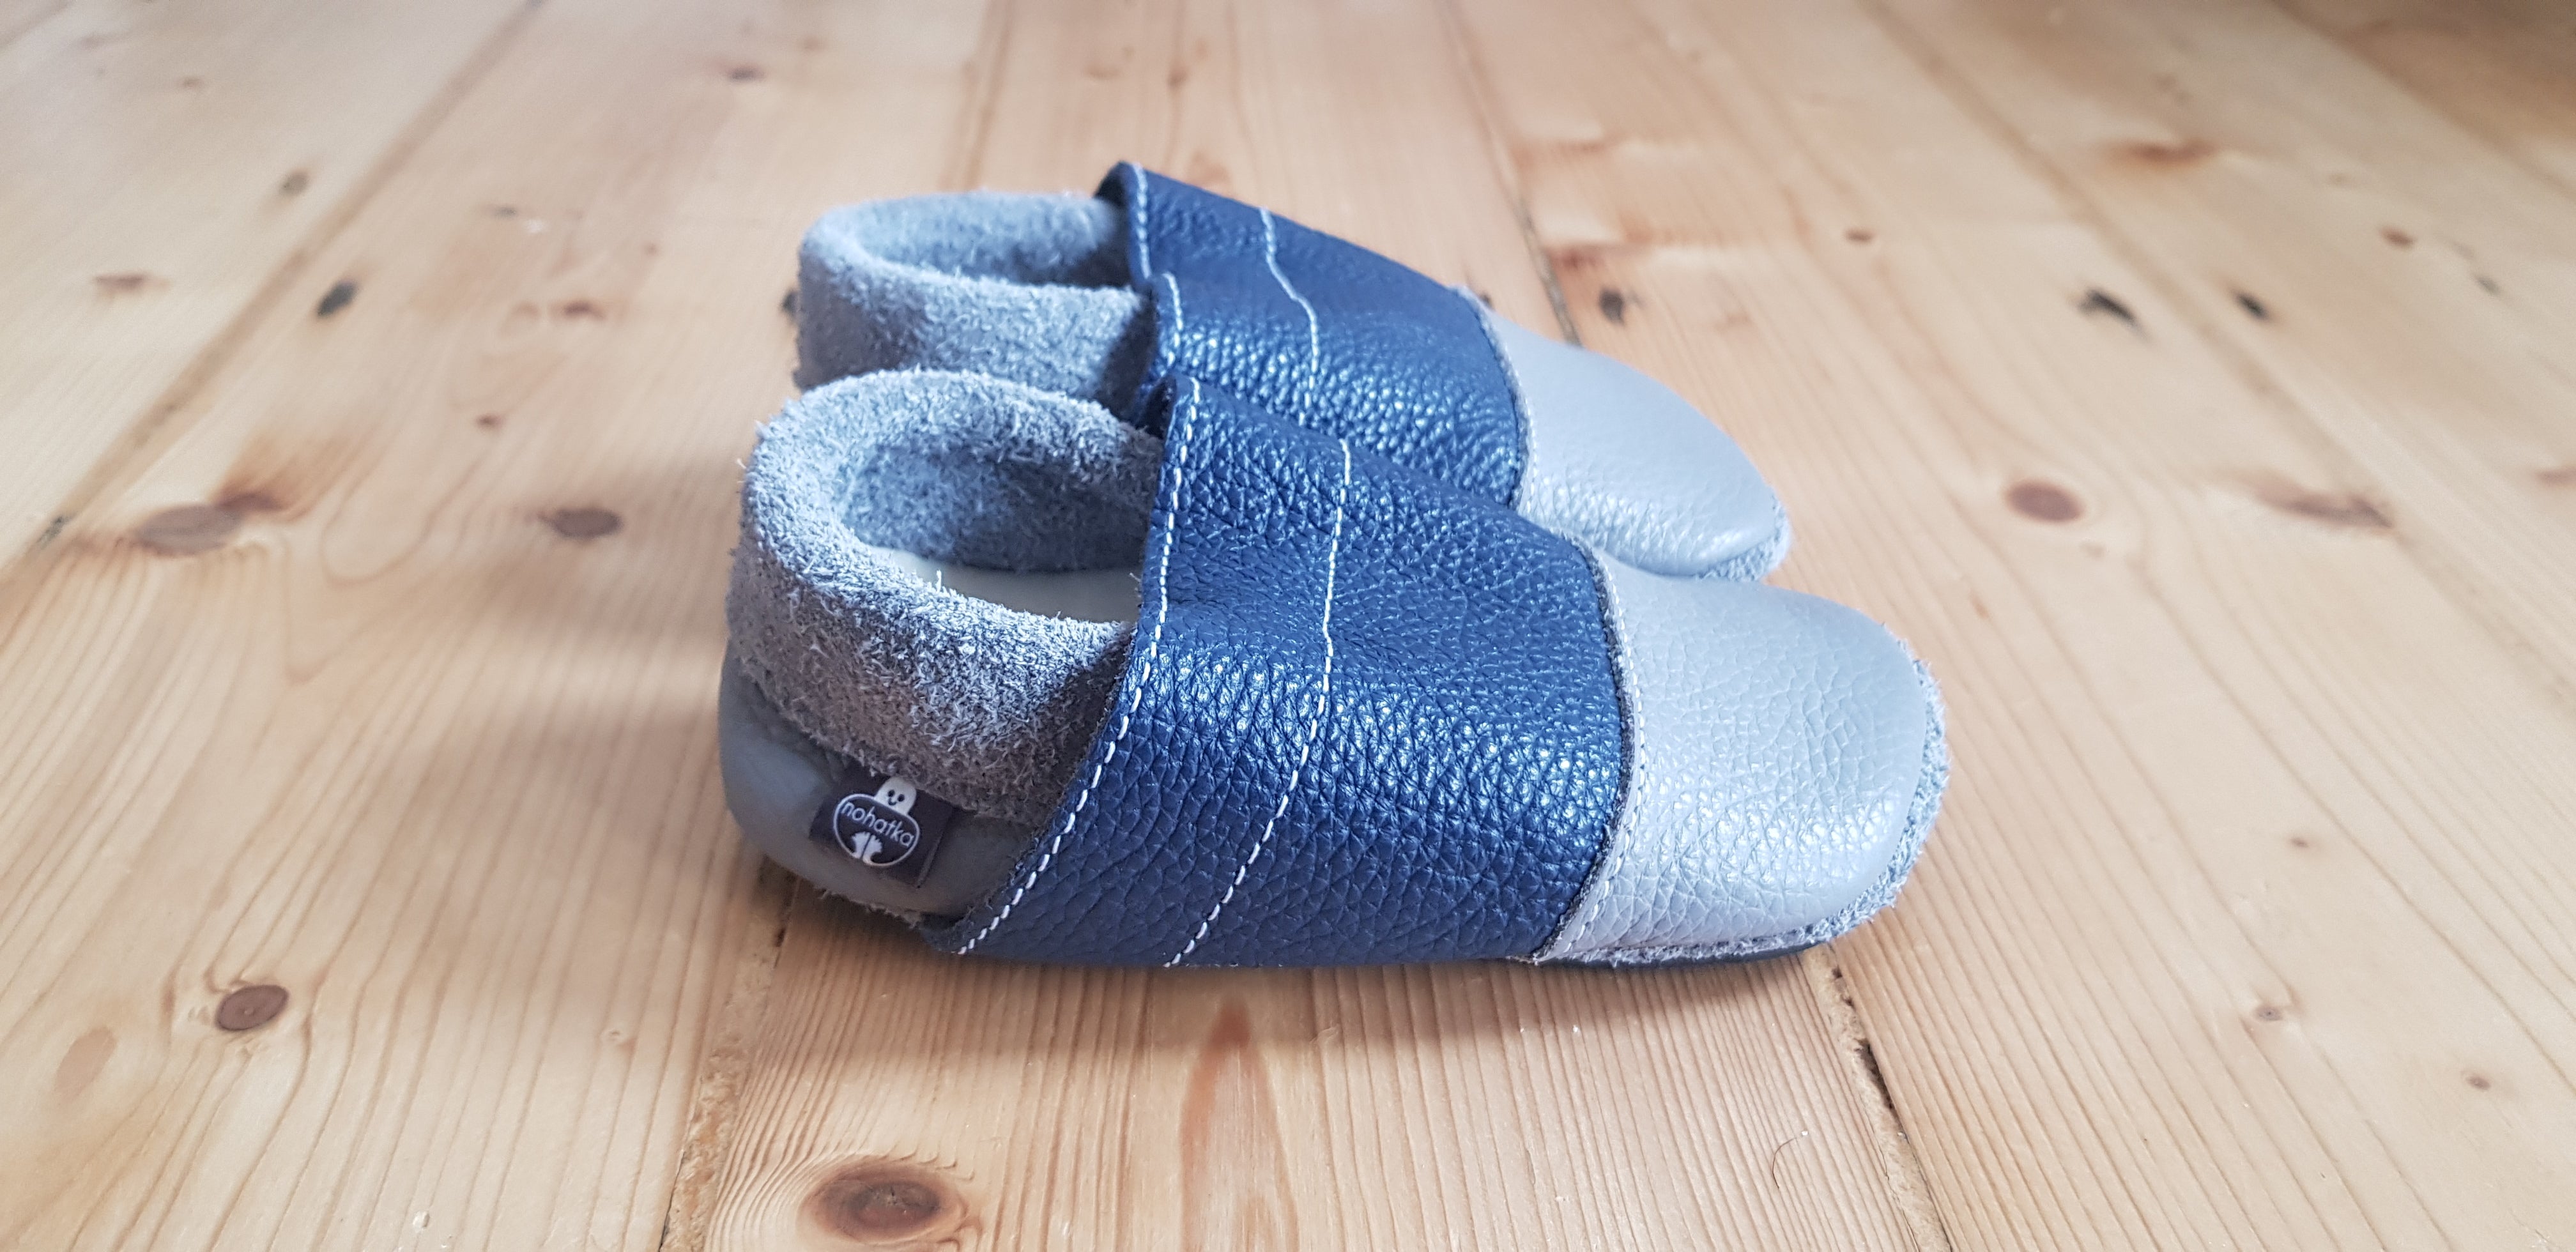 Barefoot Leather Slippers - Navy and Grey